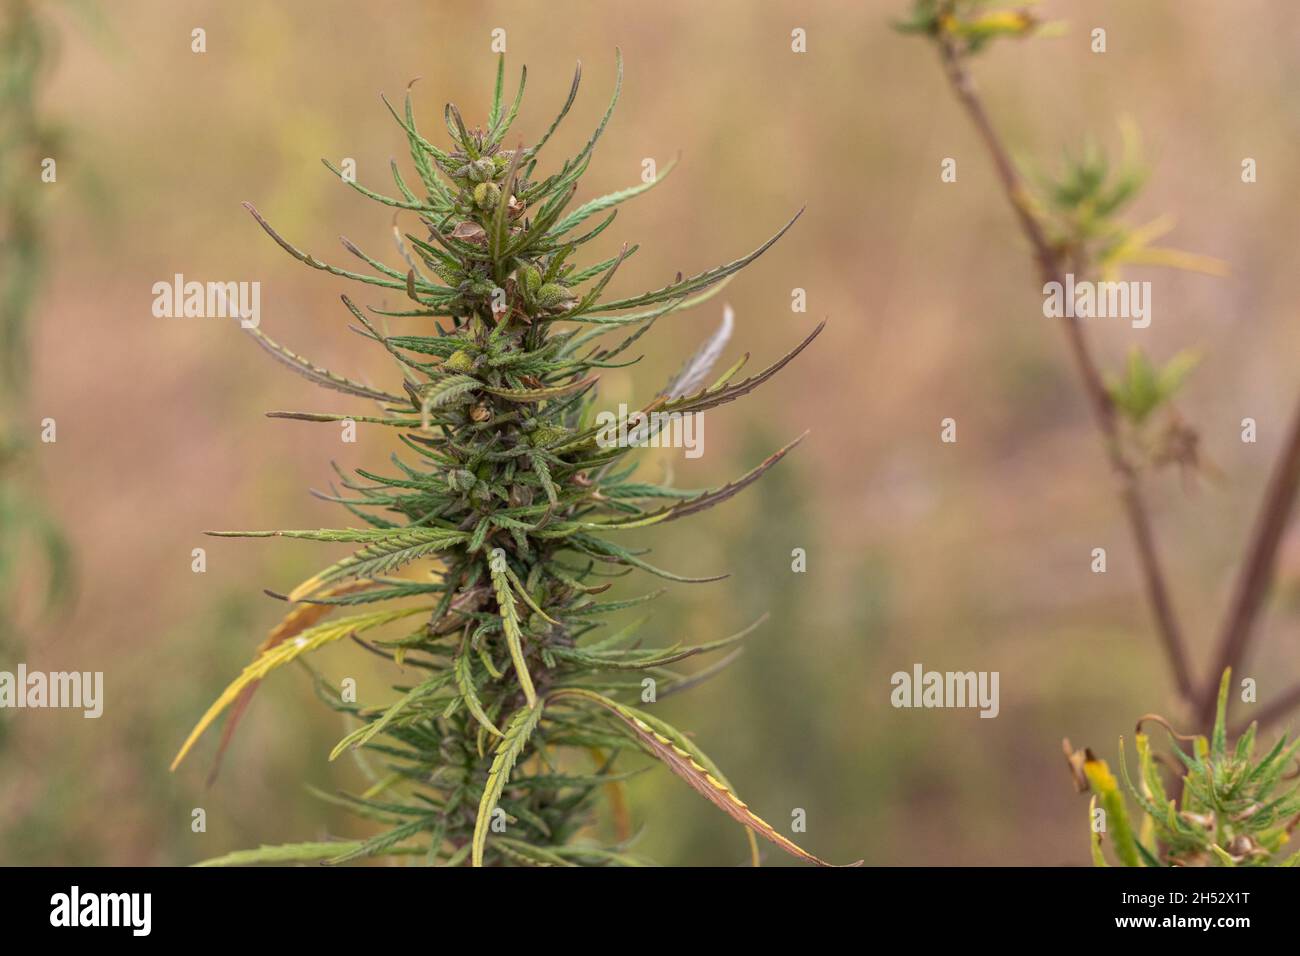 The top of the cannabis bush is green-purple in color. Blurred background Stock Photo